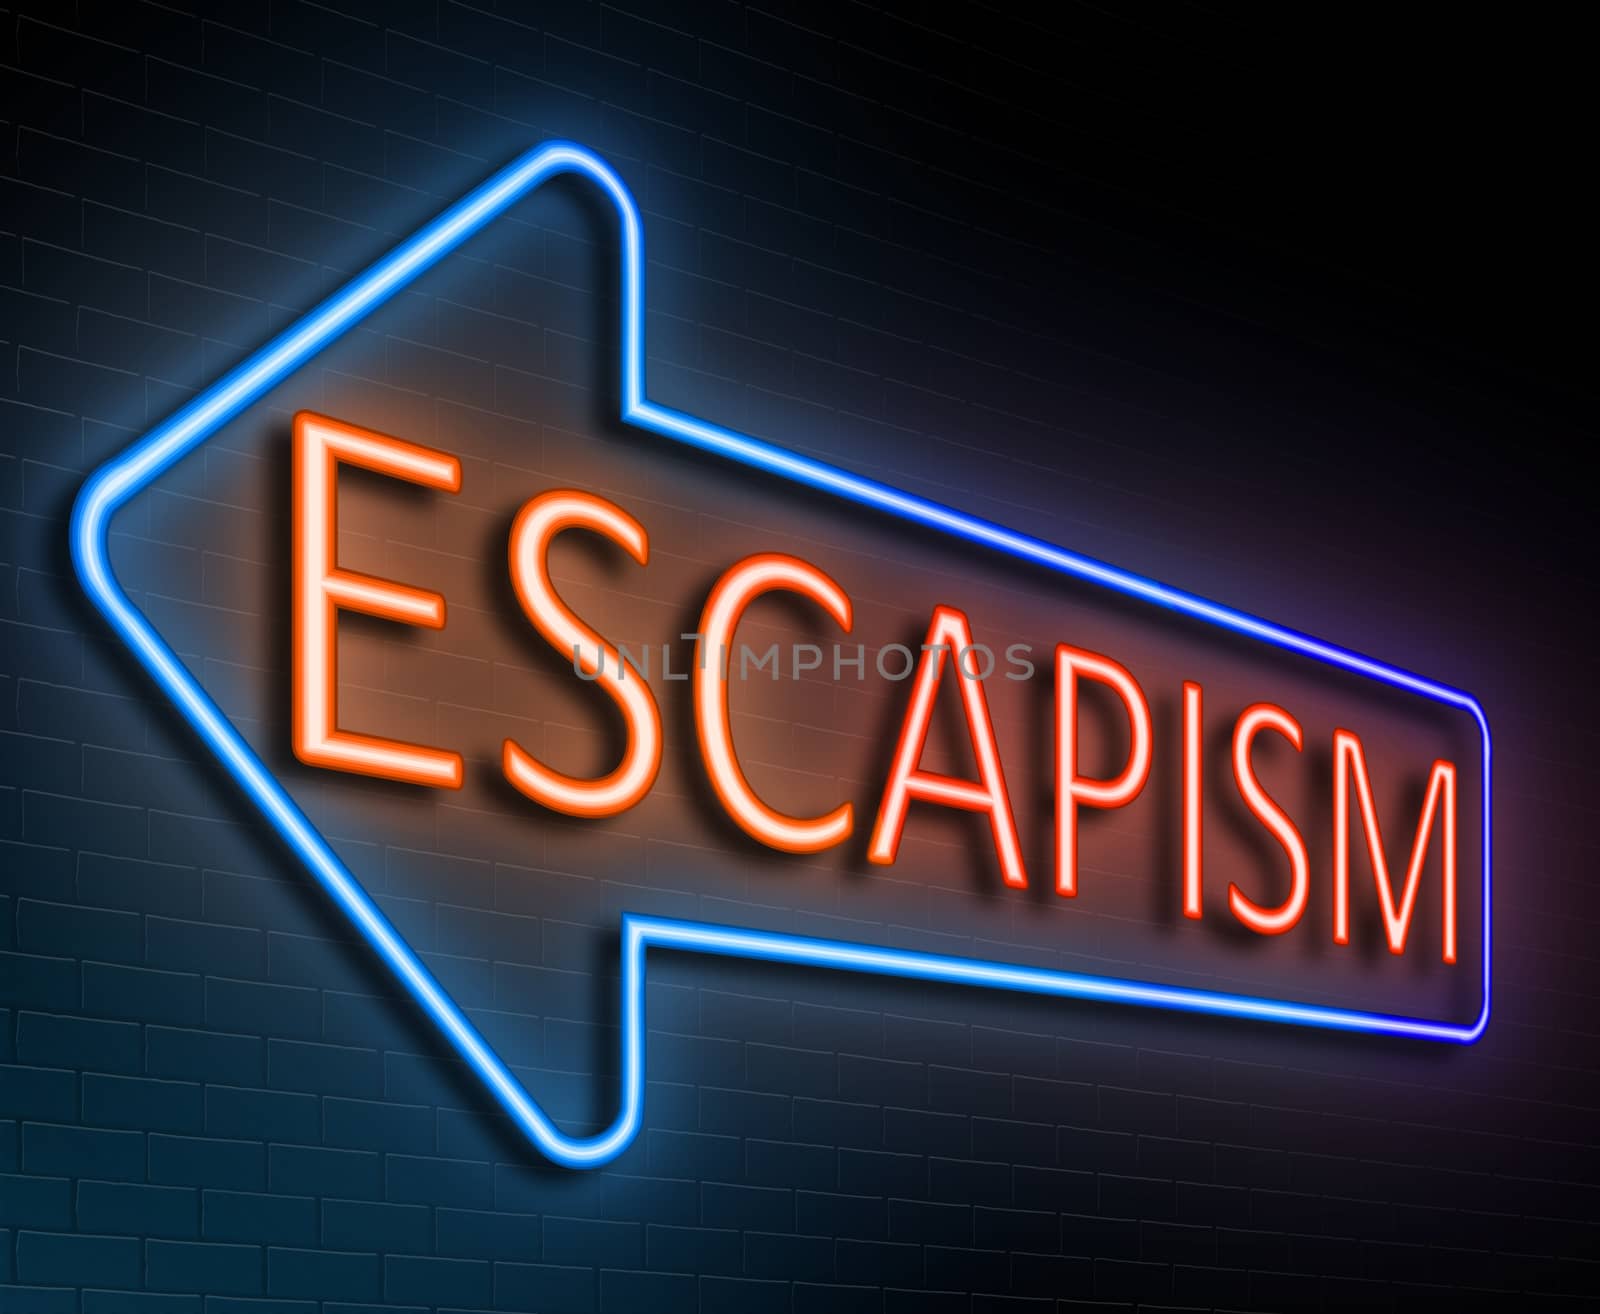 Illustration depicting an illuminated neon sign with an escapism concept.